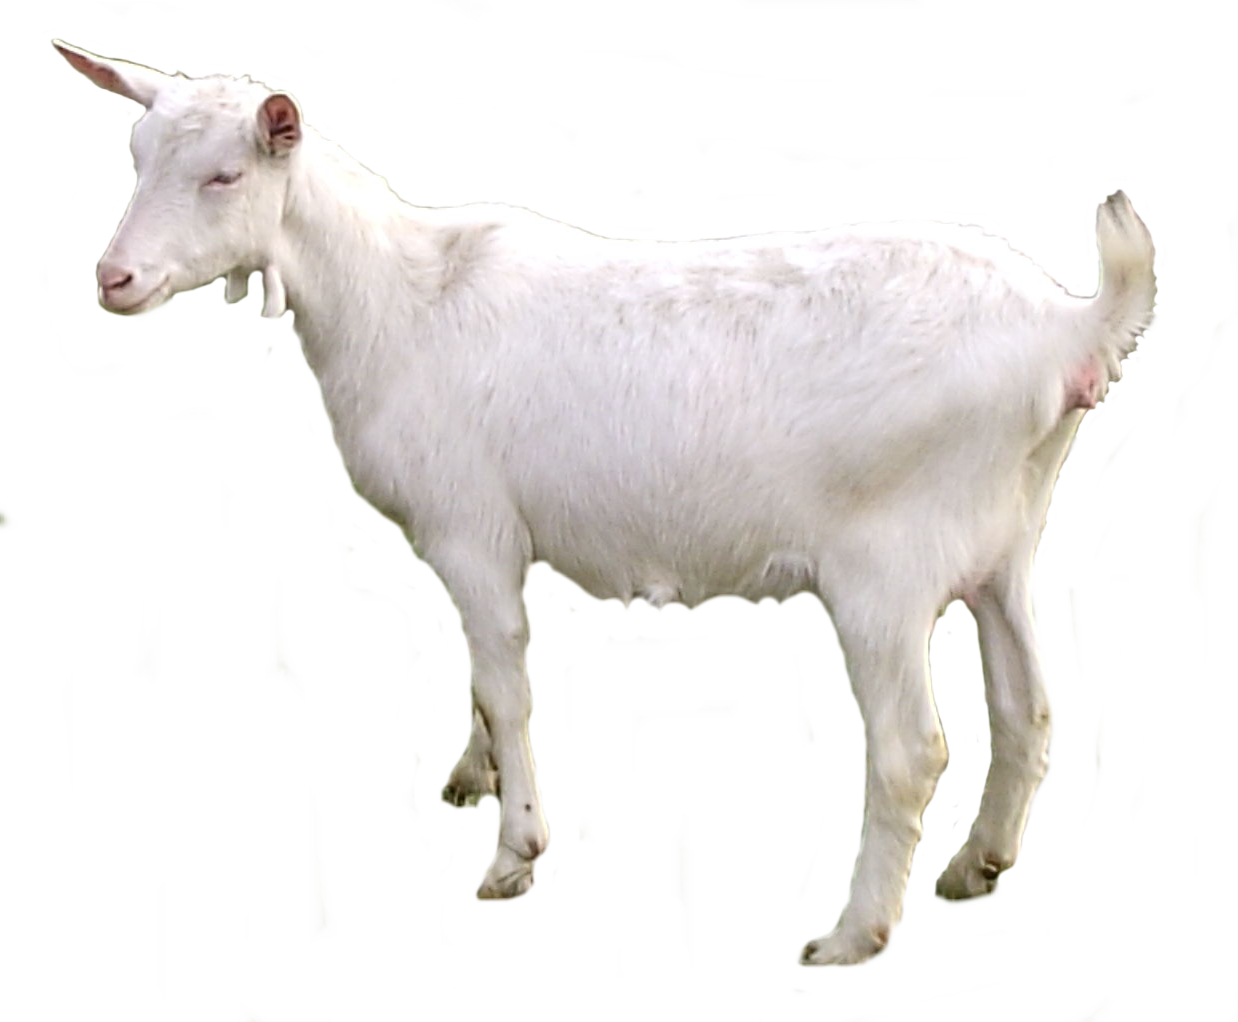 png 1238x1022 Goat with no ba